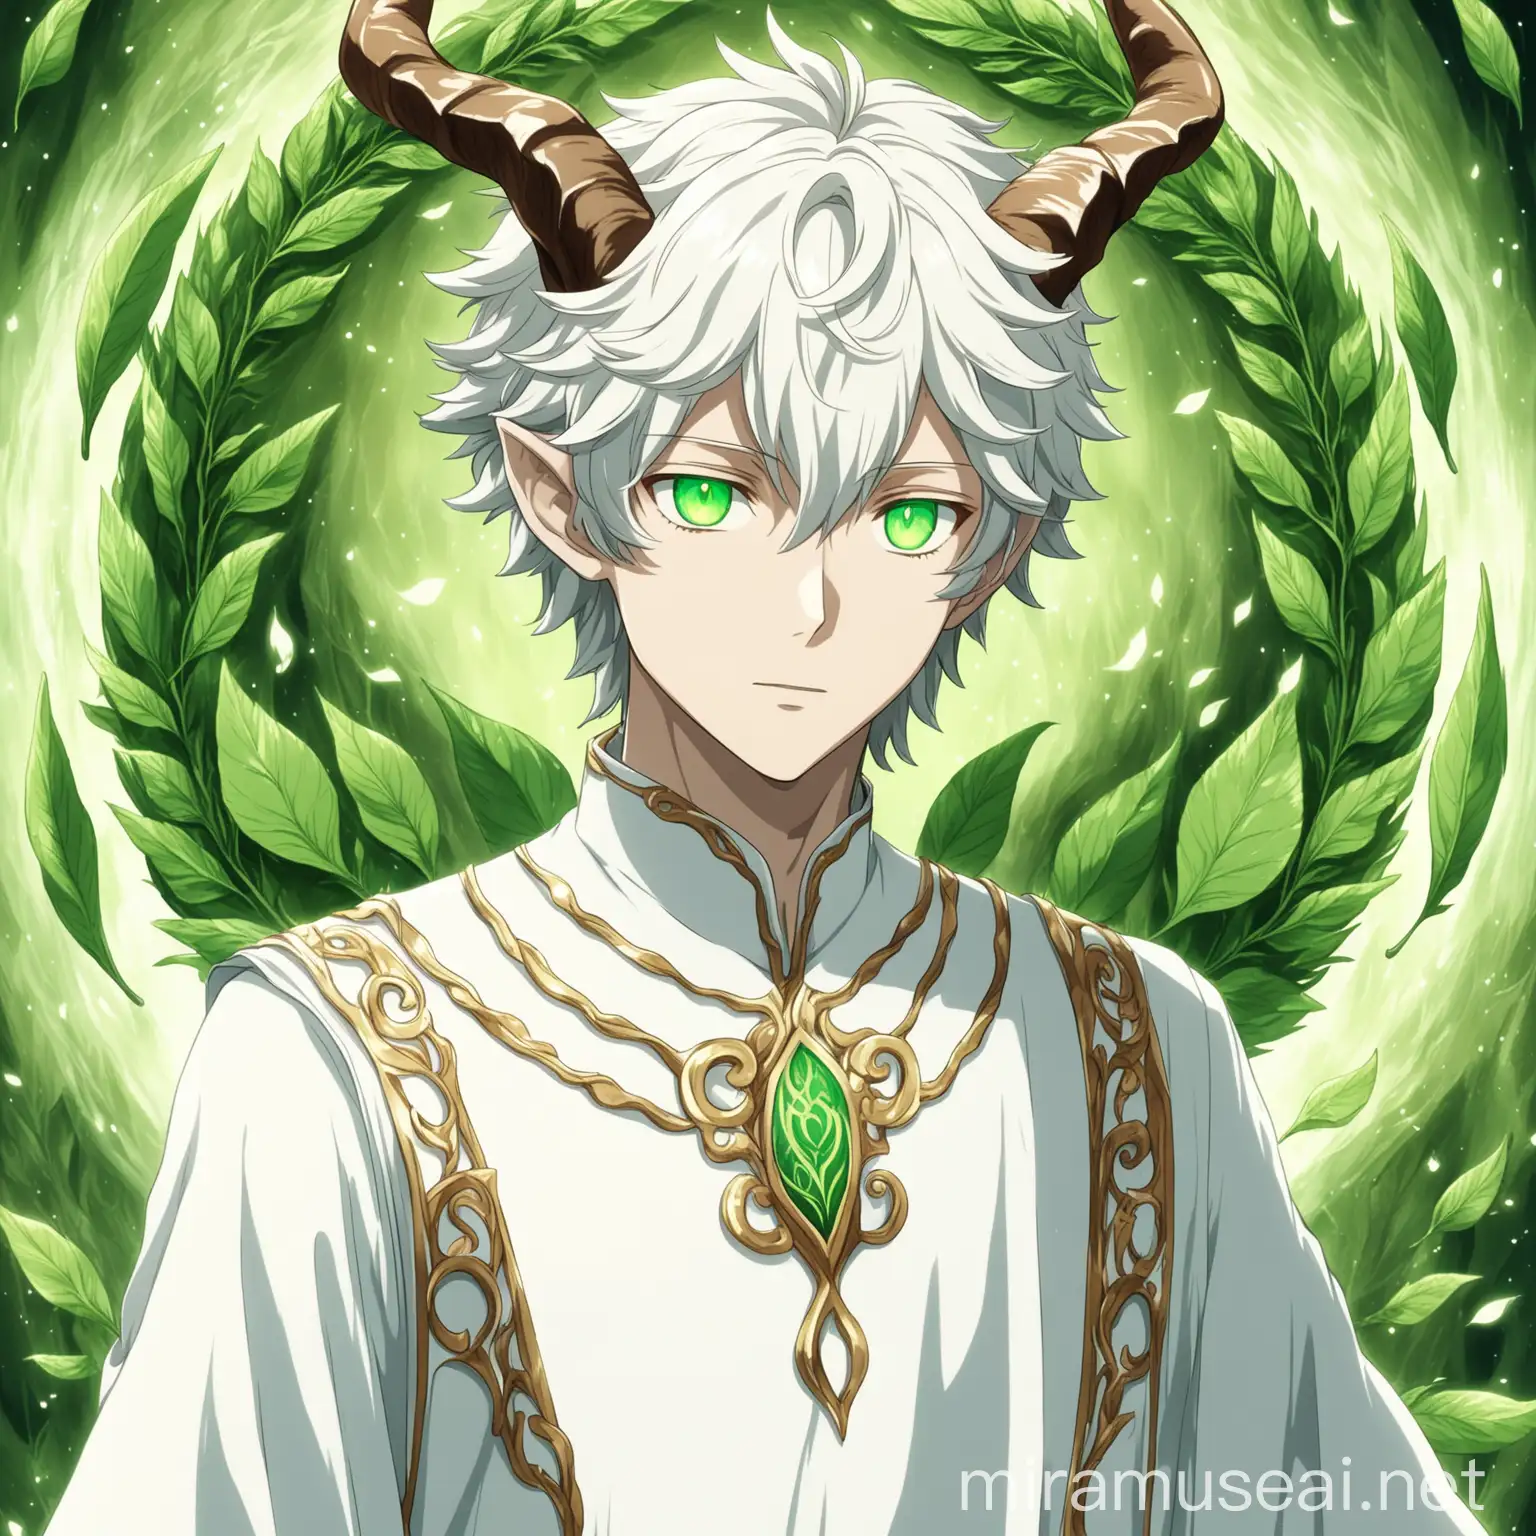 a humanoid with faun horns and wolf hears. He has green leaf-colored eyes. he has white wavy medium cut hair. He wears an elegant white tunic with some symbols. in anime